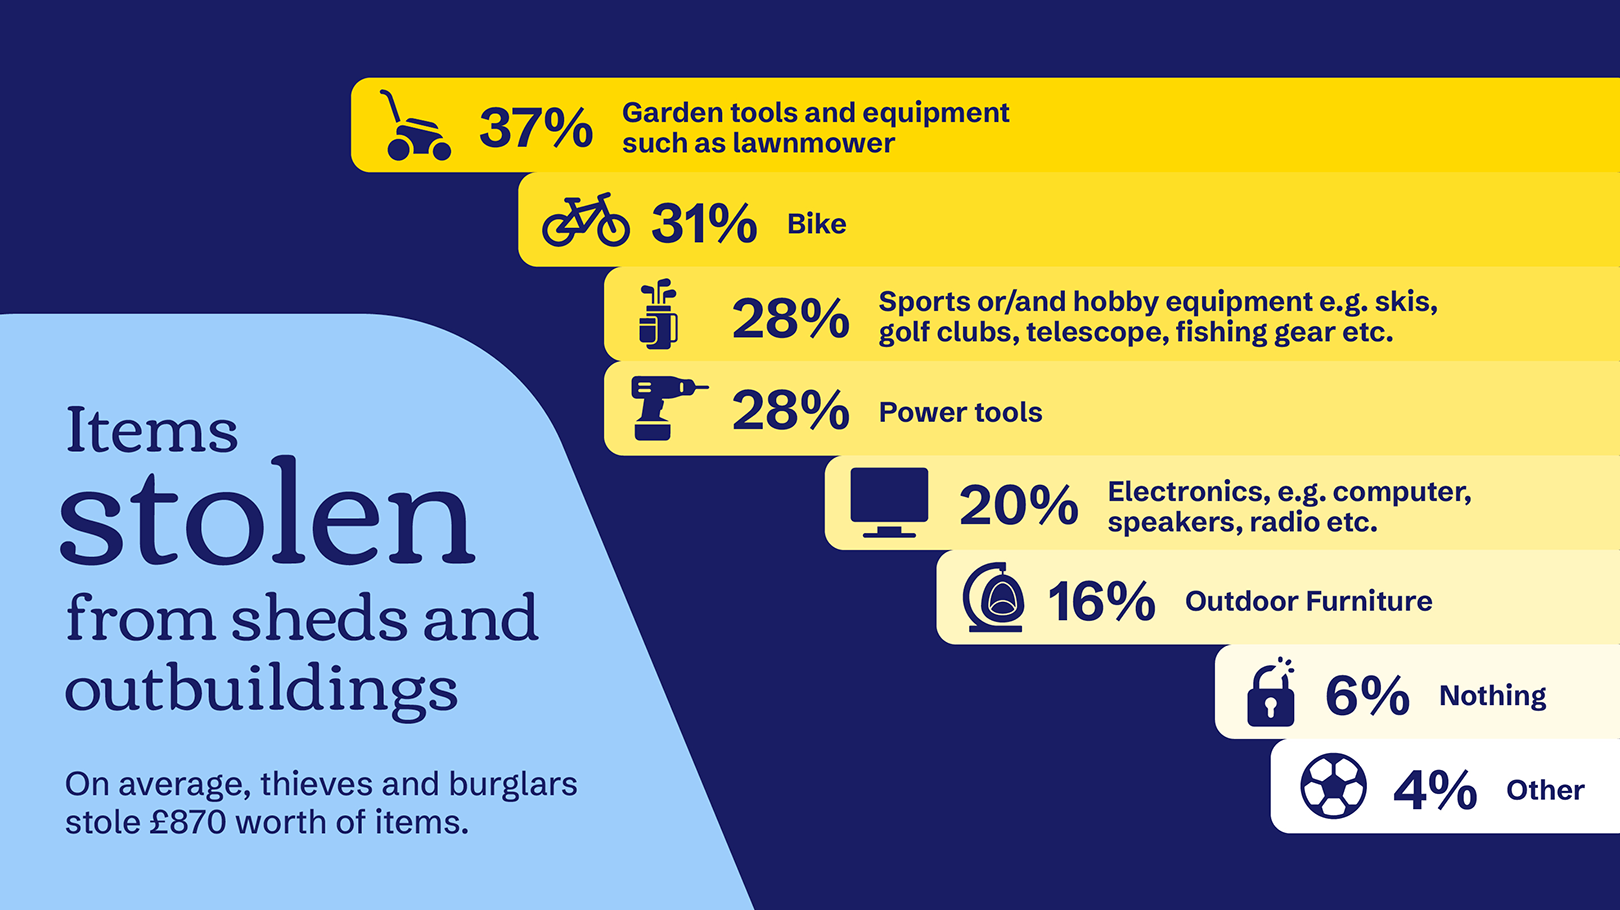 Statistics of items stolen from sheds and outbuildings as described above